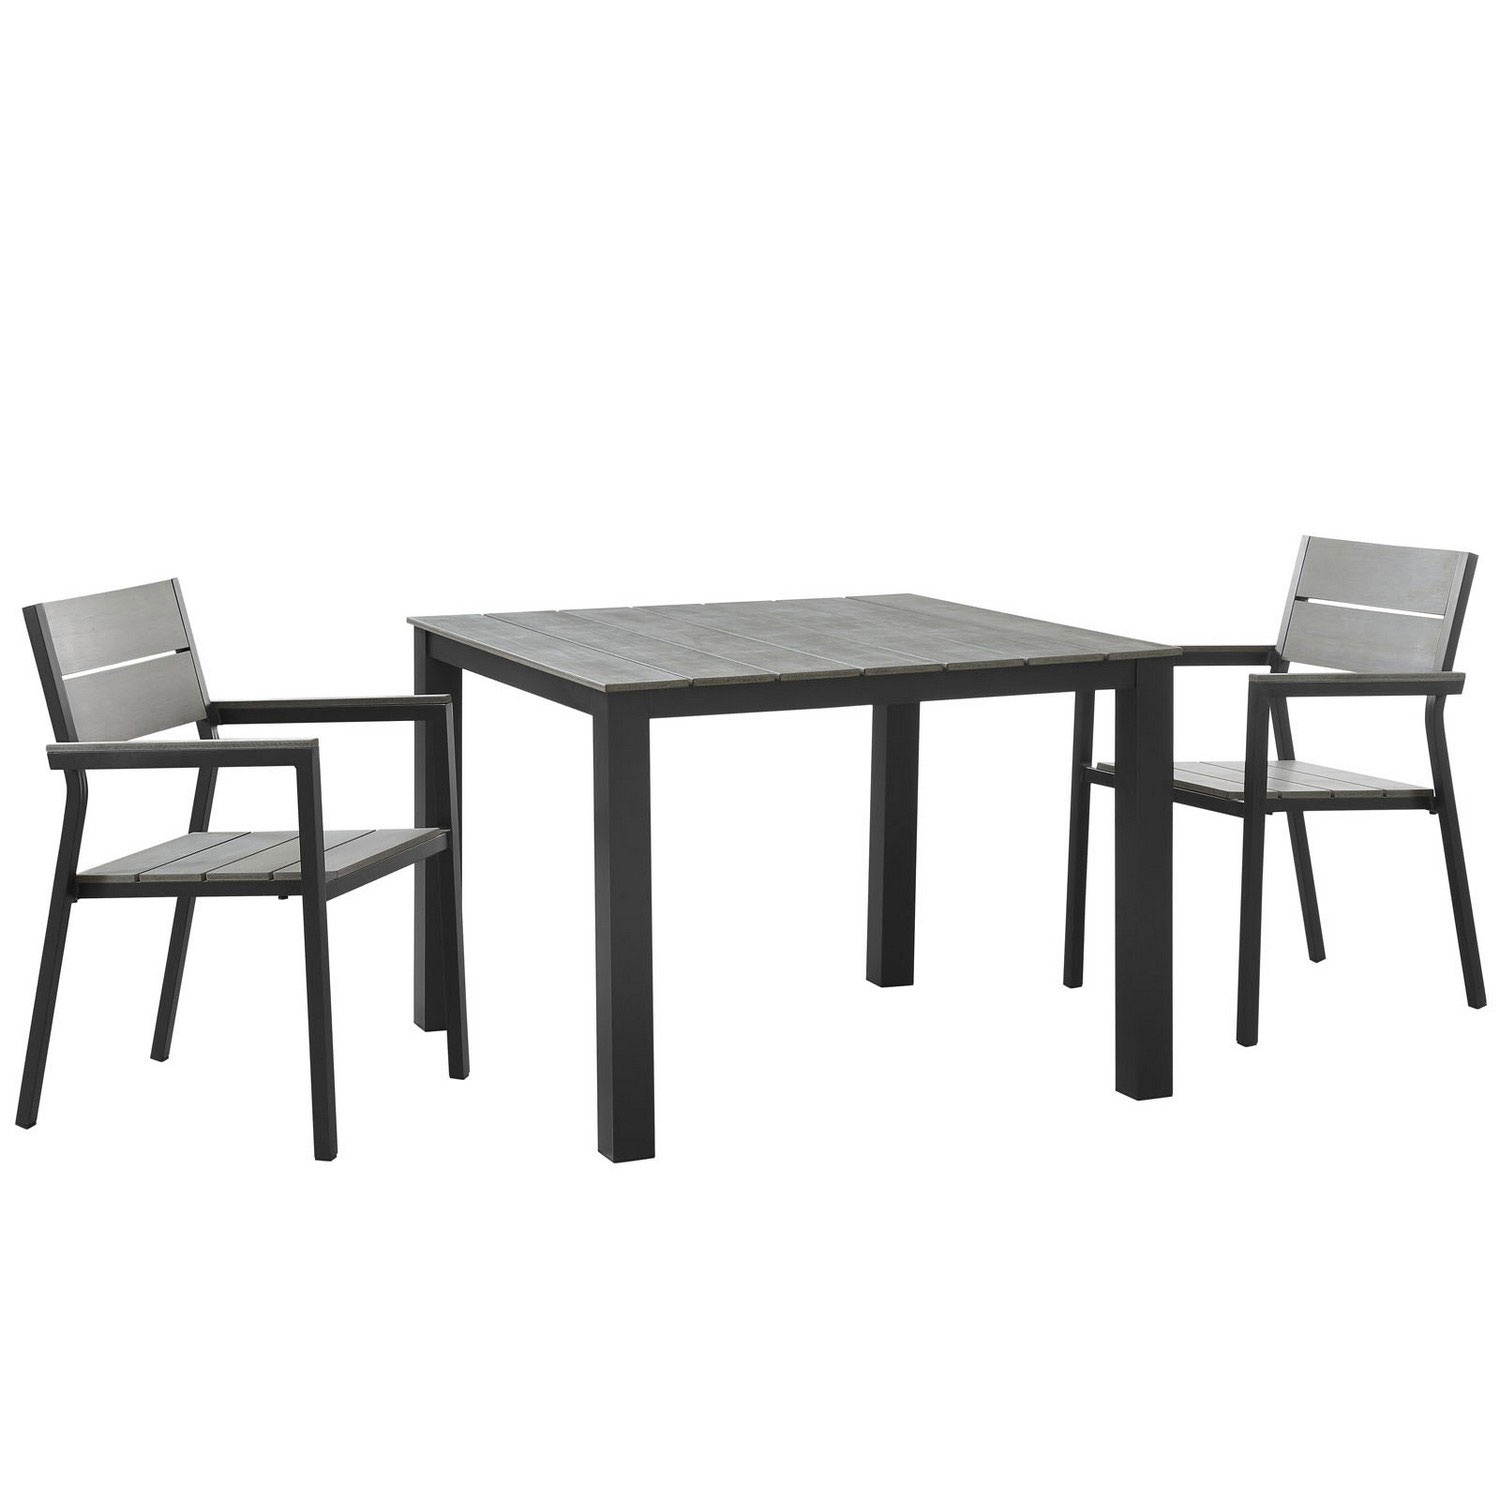 Modway Maine 3 Piece Outdoor Patio Dining Set - Brown/Gray